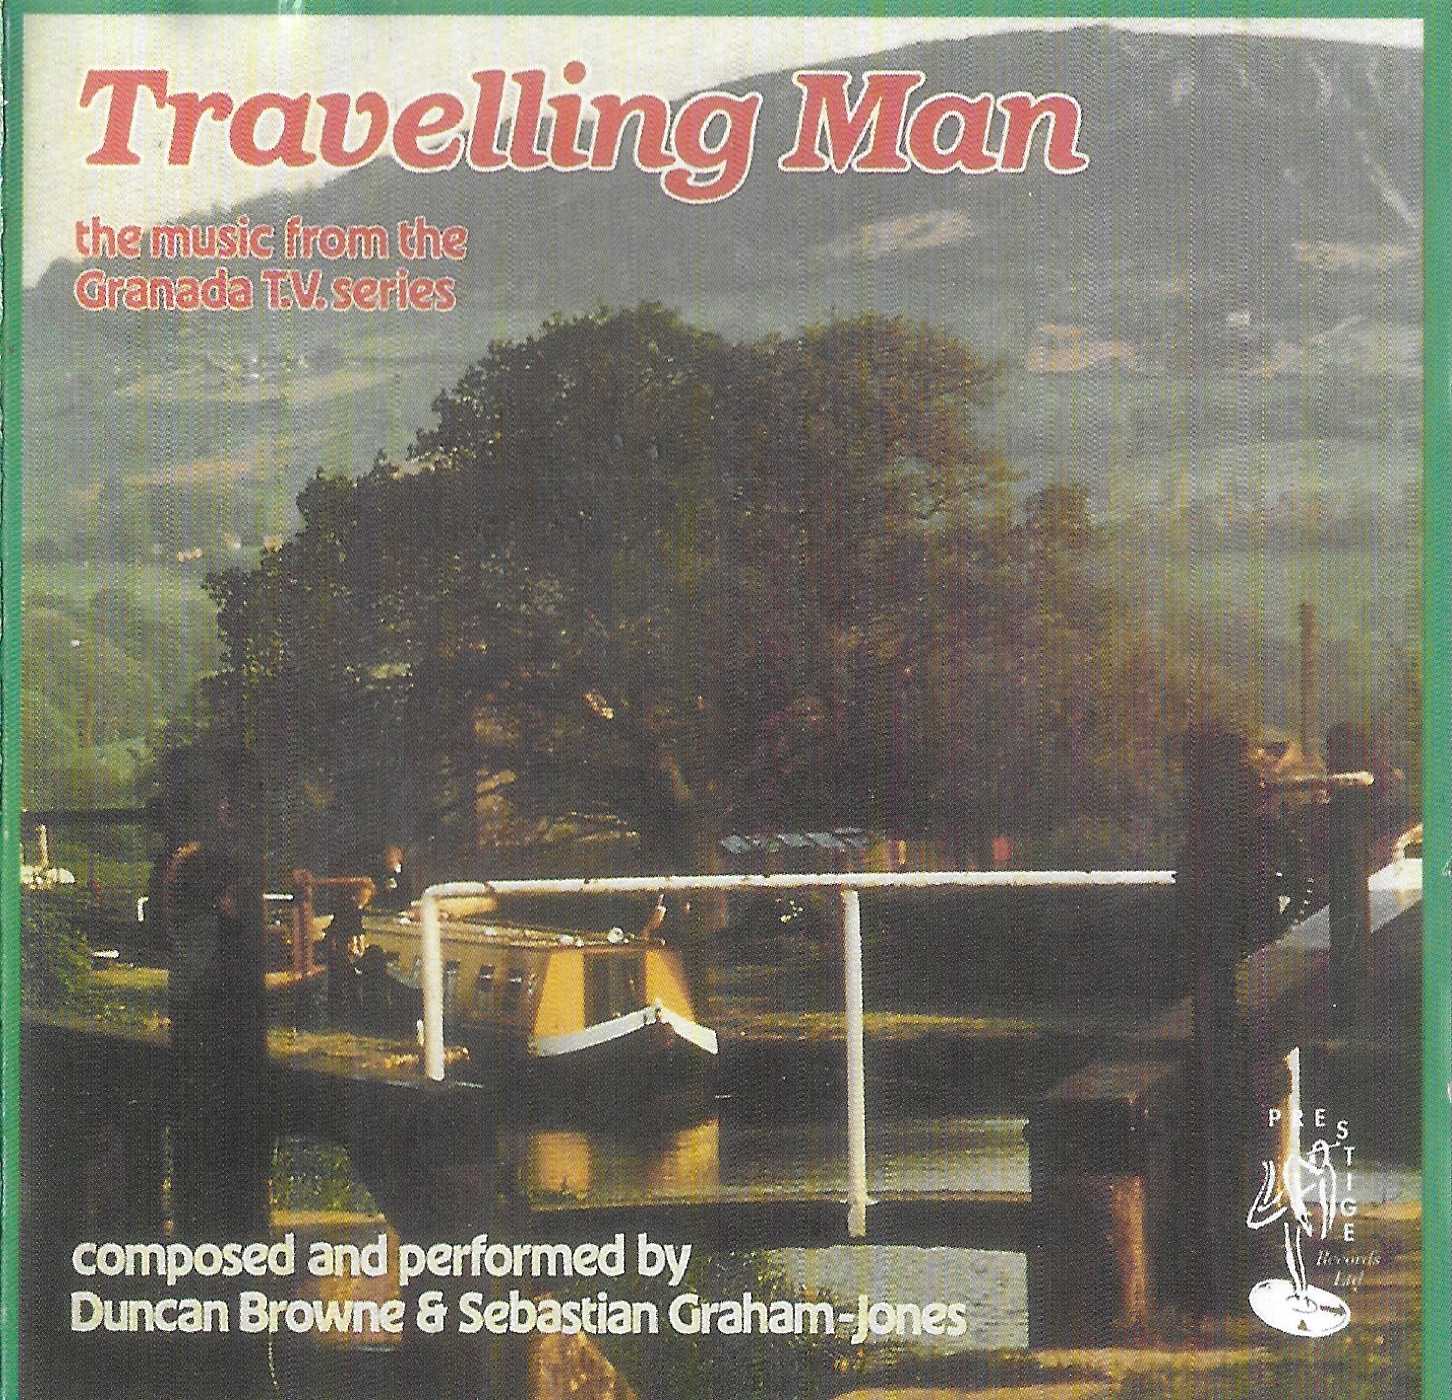 Picture of Travelling man by artist Duncan Browne / Sebastian Graham-Jones from ITV, Channel 4 and Channel 5 cds library